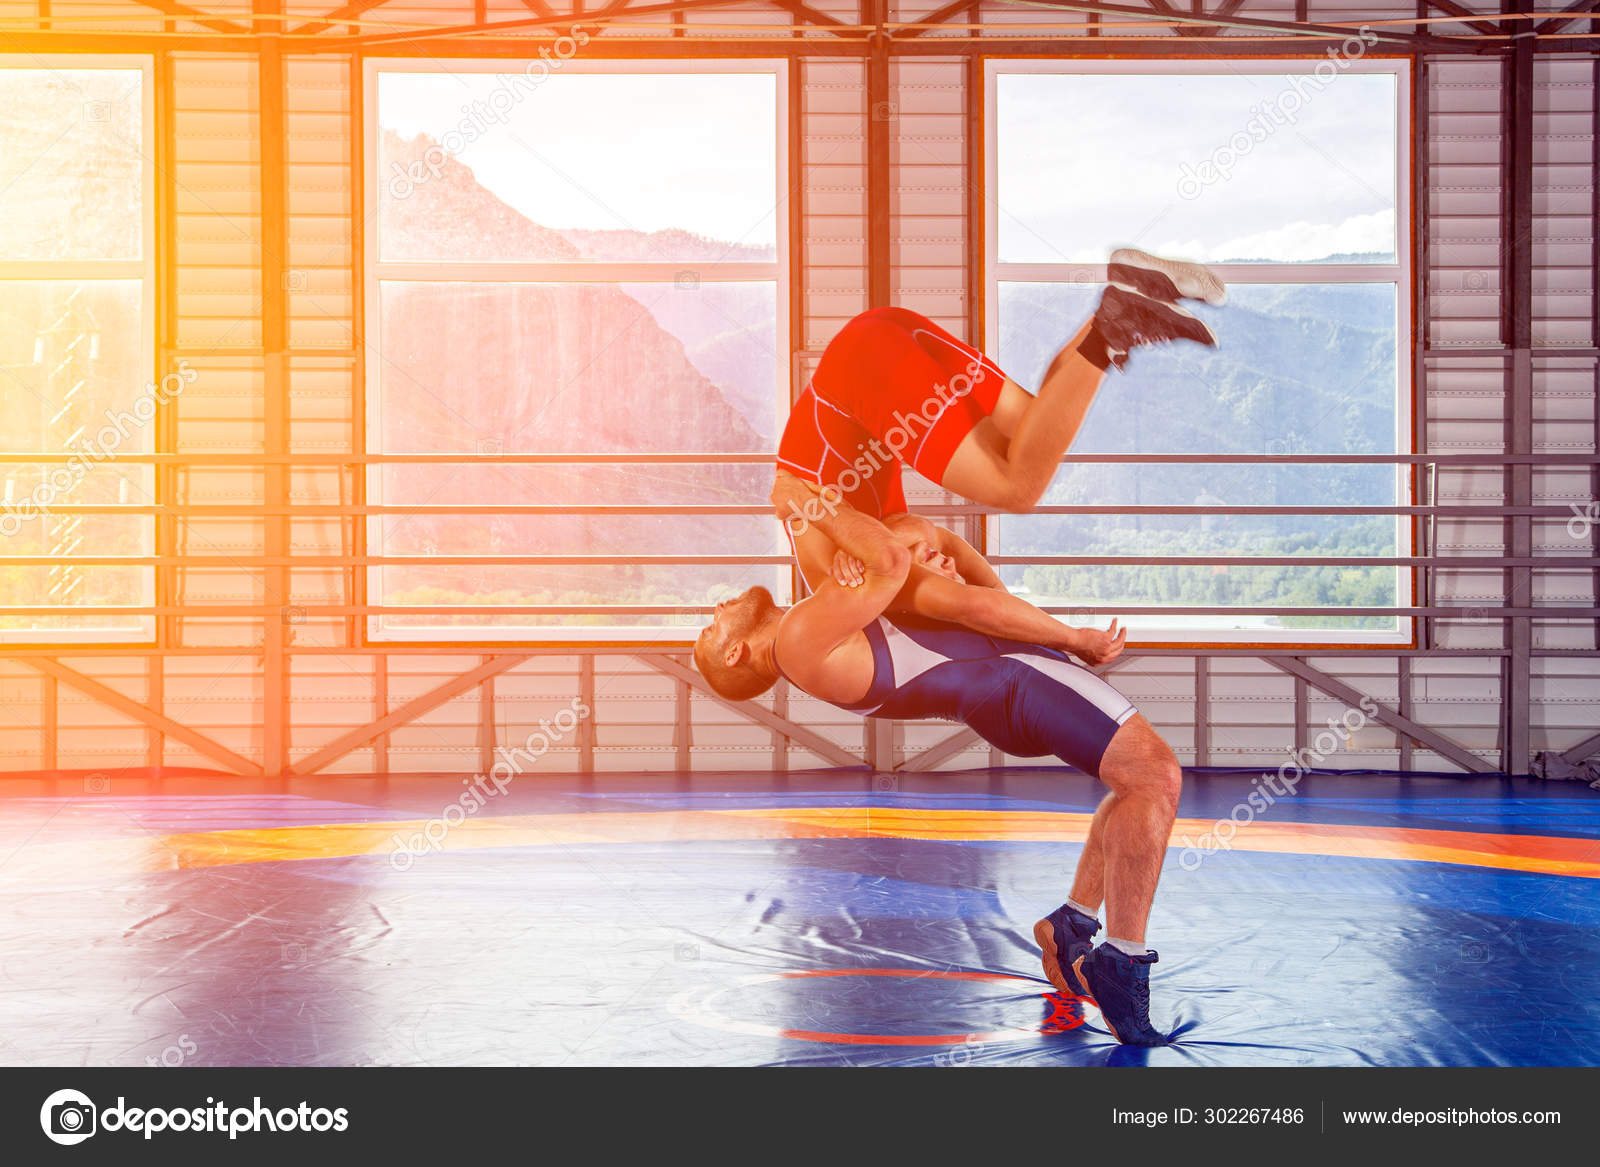 Two men in sports wrestling tights and wrestling during a traditional  Greco-Roman wrestling in fight on a wrestling mat. Wrestler throws his  opponent's chest through Photos